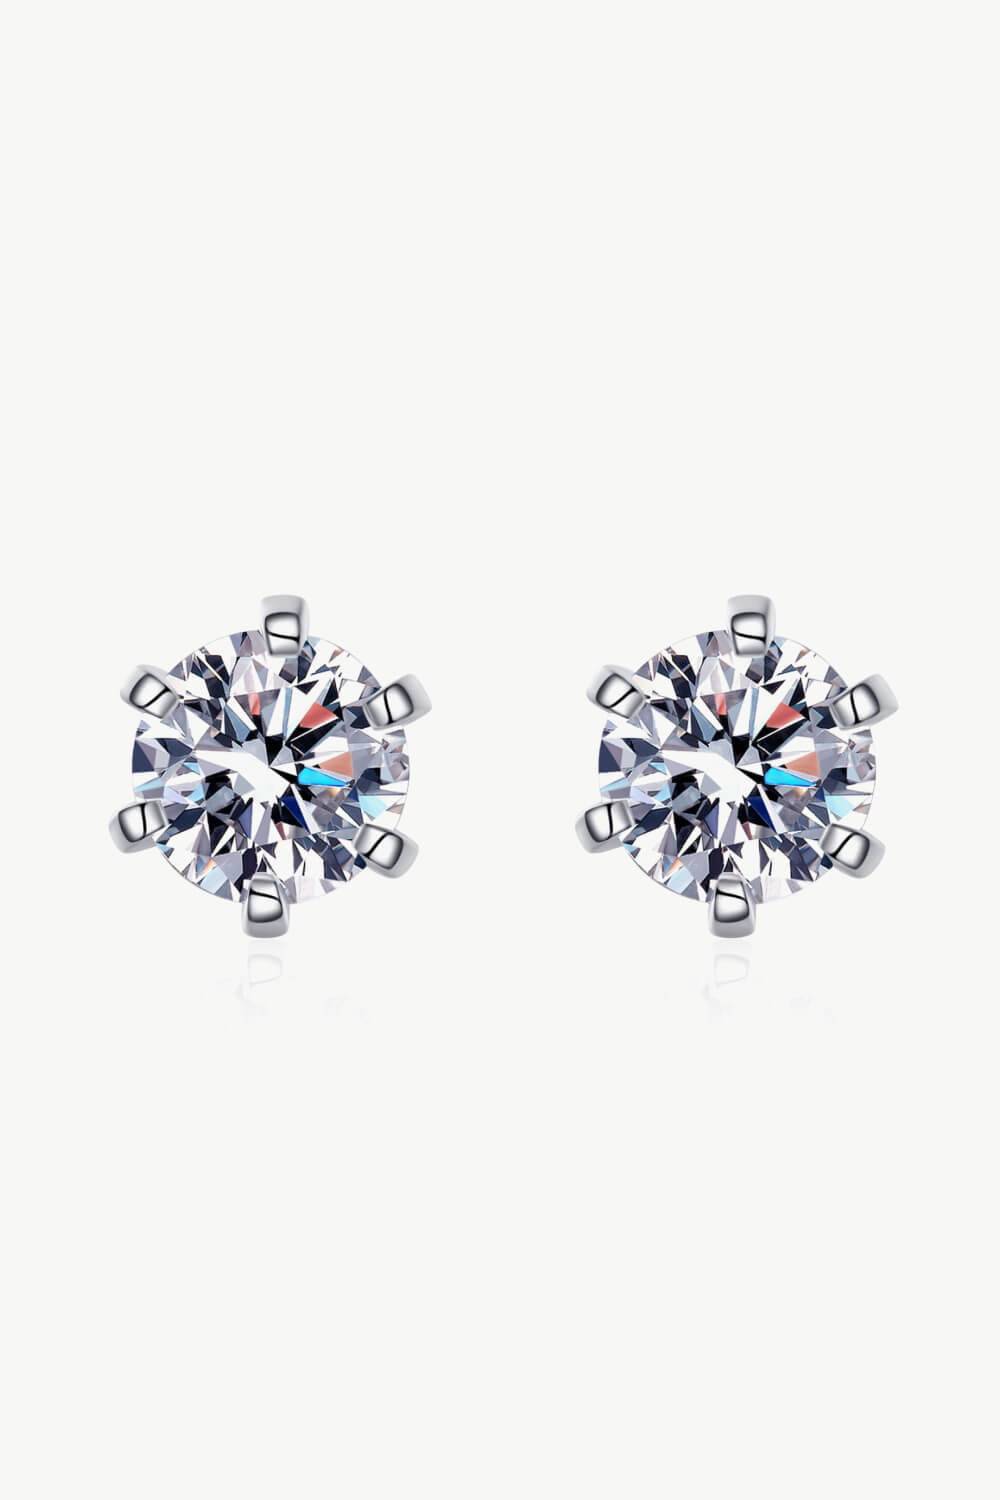 2 Carat Inlaid Moissanite Stud Earrings BLUE ZONE PLANET